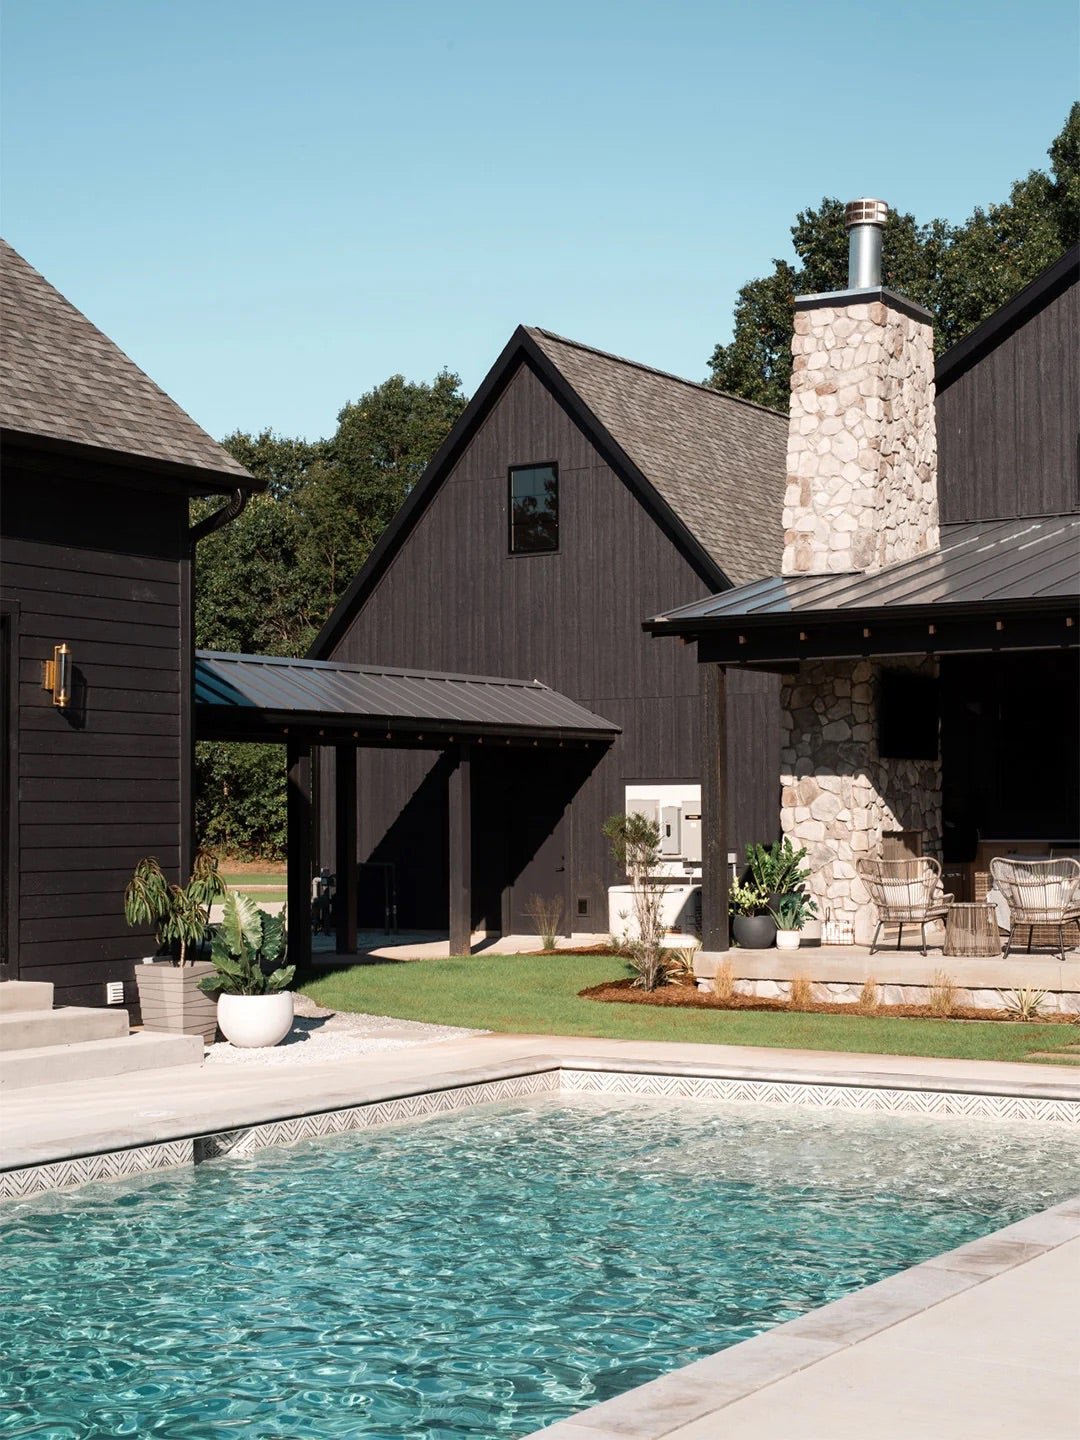 Take It From These 7 Modern Farmhouse Exteriors: The Trend Is Evolving